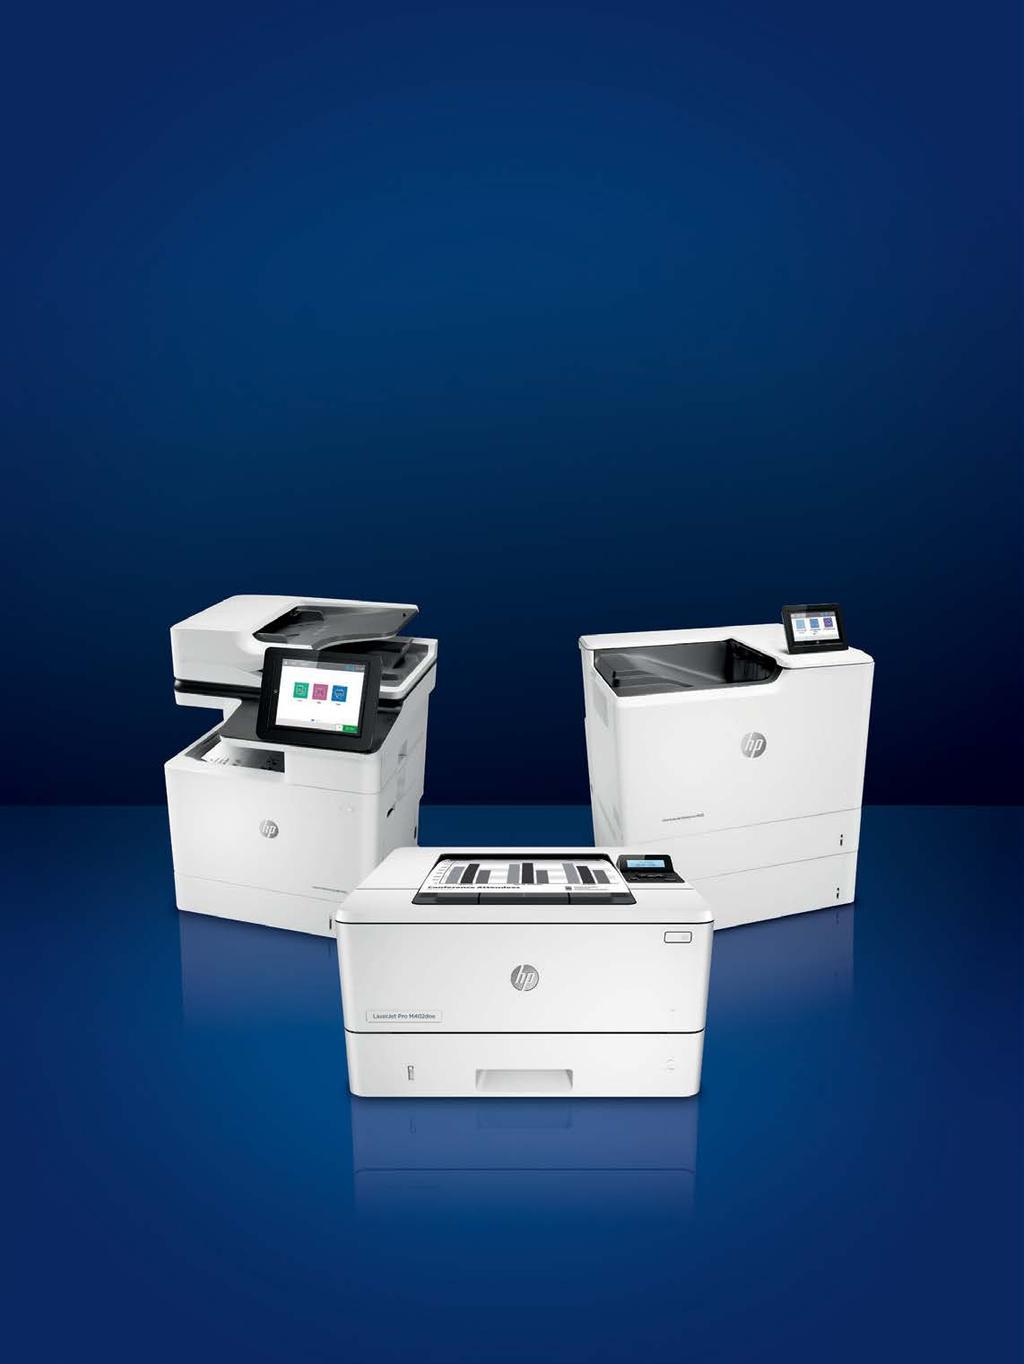 Worry-free printing for up to three years 1 when you use Original HP supplies! 2 Leading businesses require top performance from their office equipment.